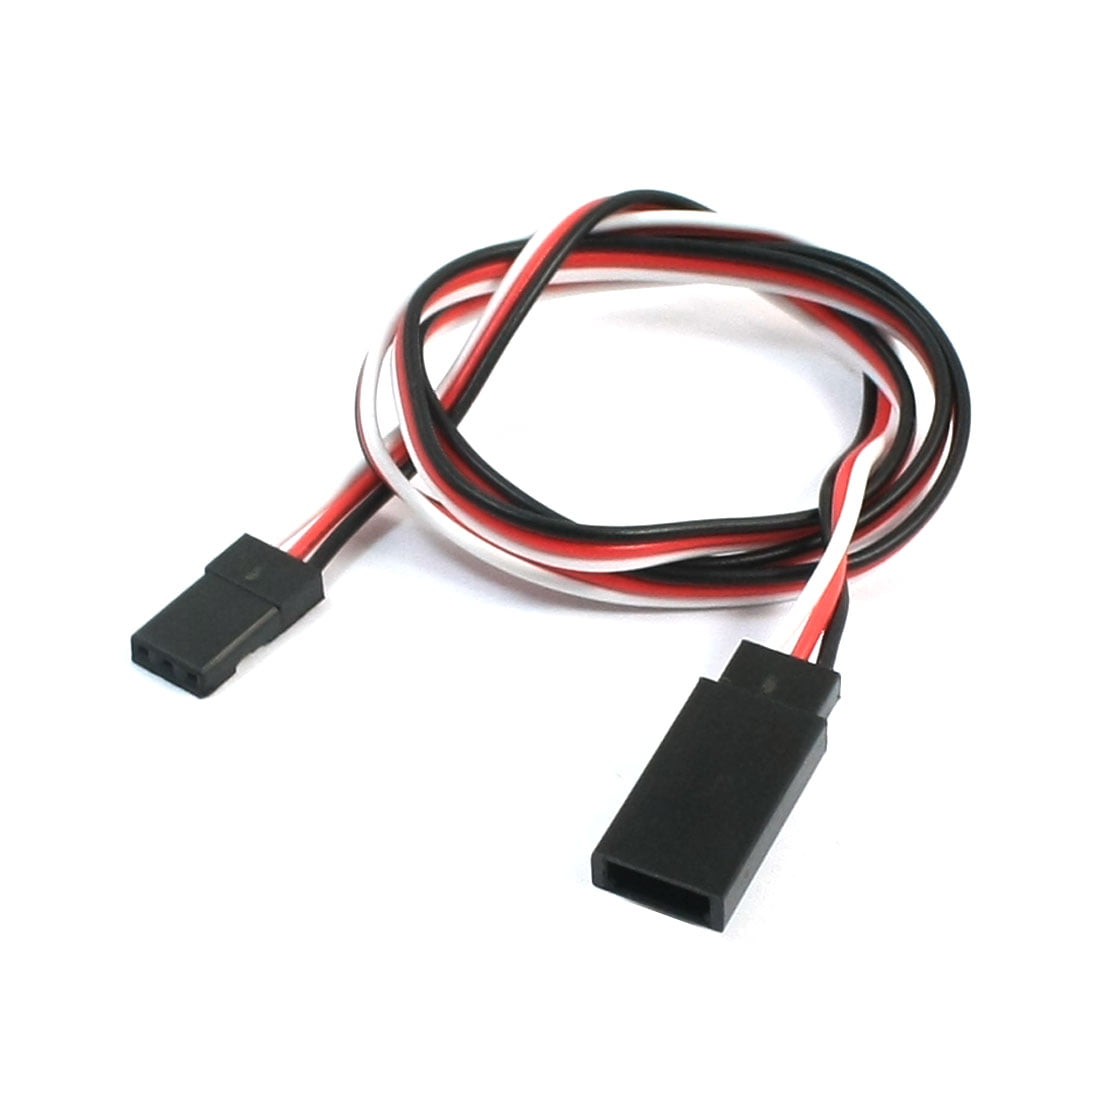 uxcell 15cm Y Servo Extension Cable Remote Control Racing Part 1 Female to 2 Male Lead Cord